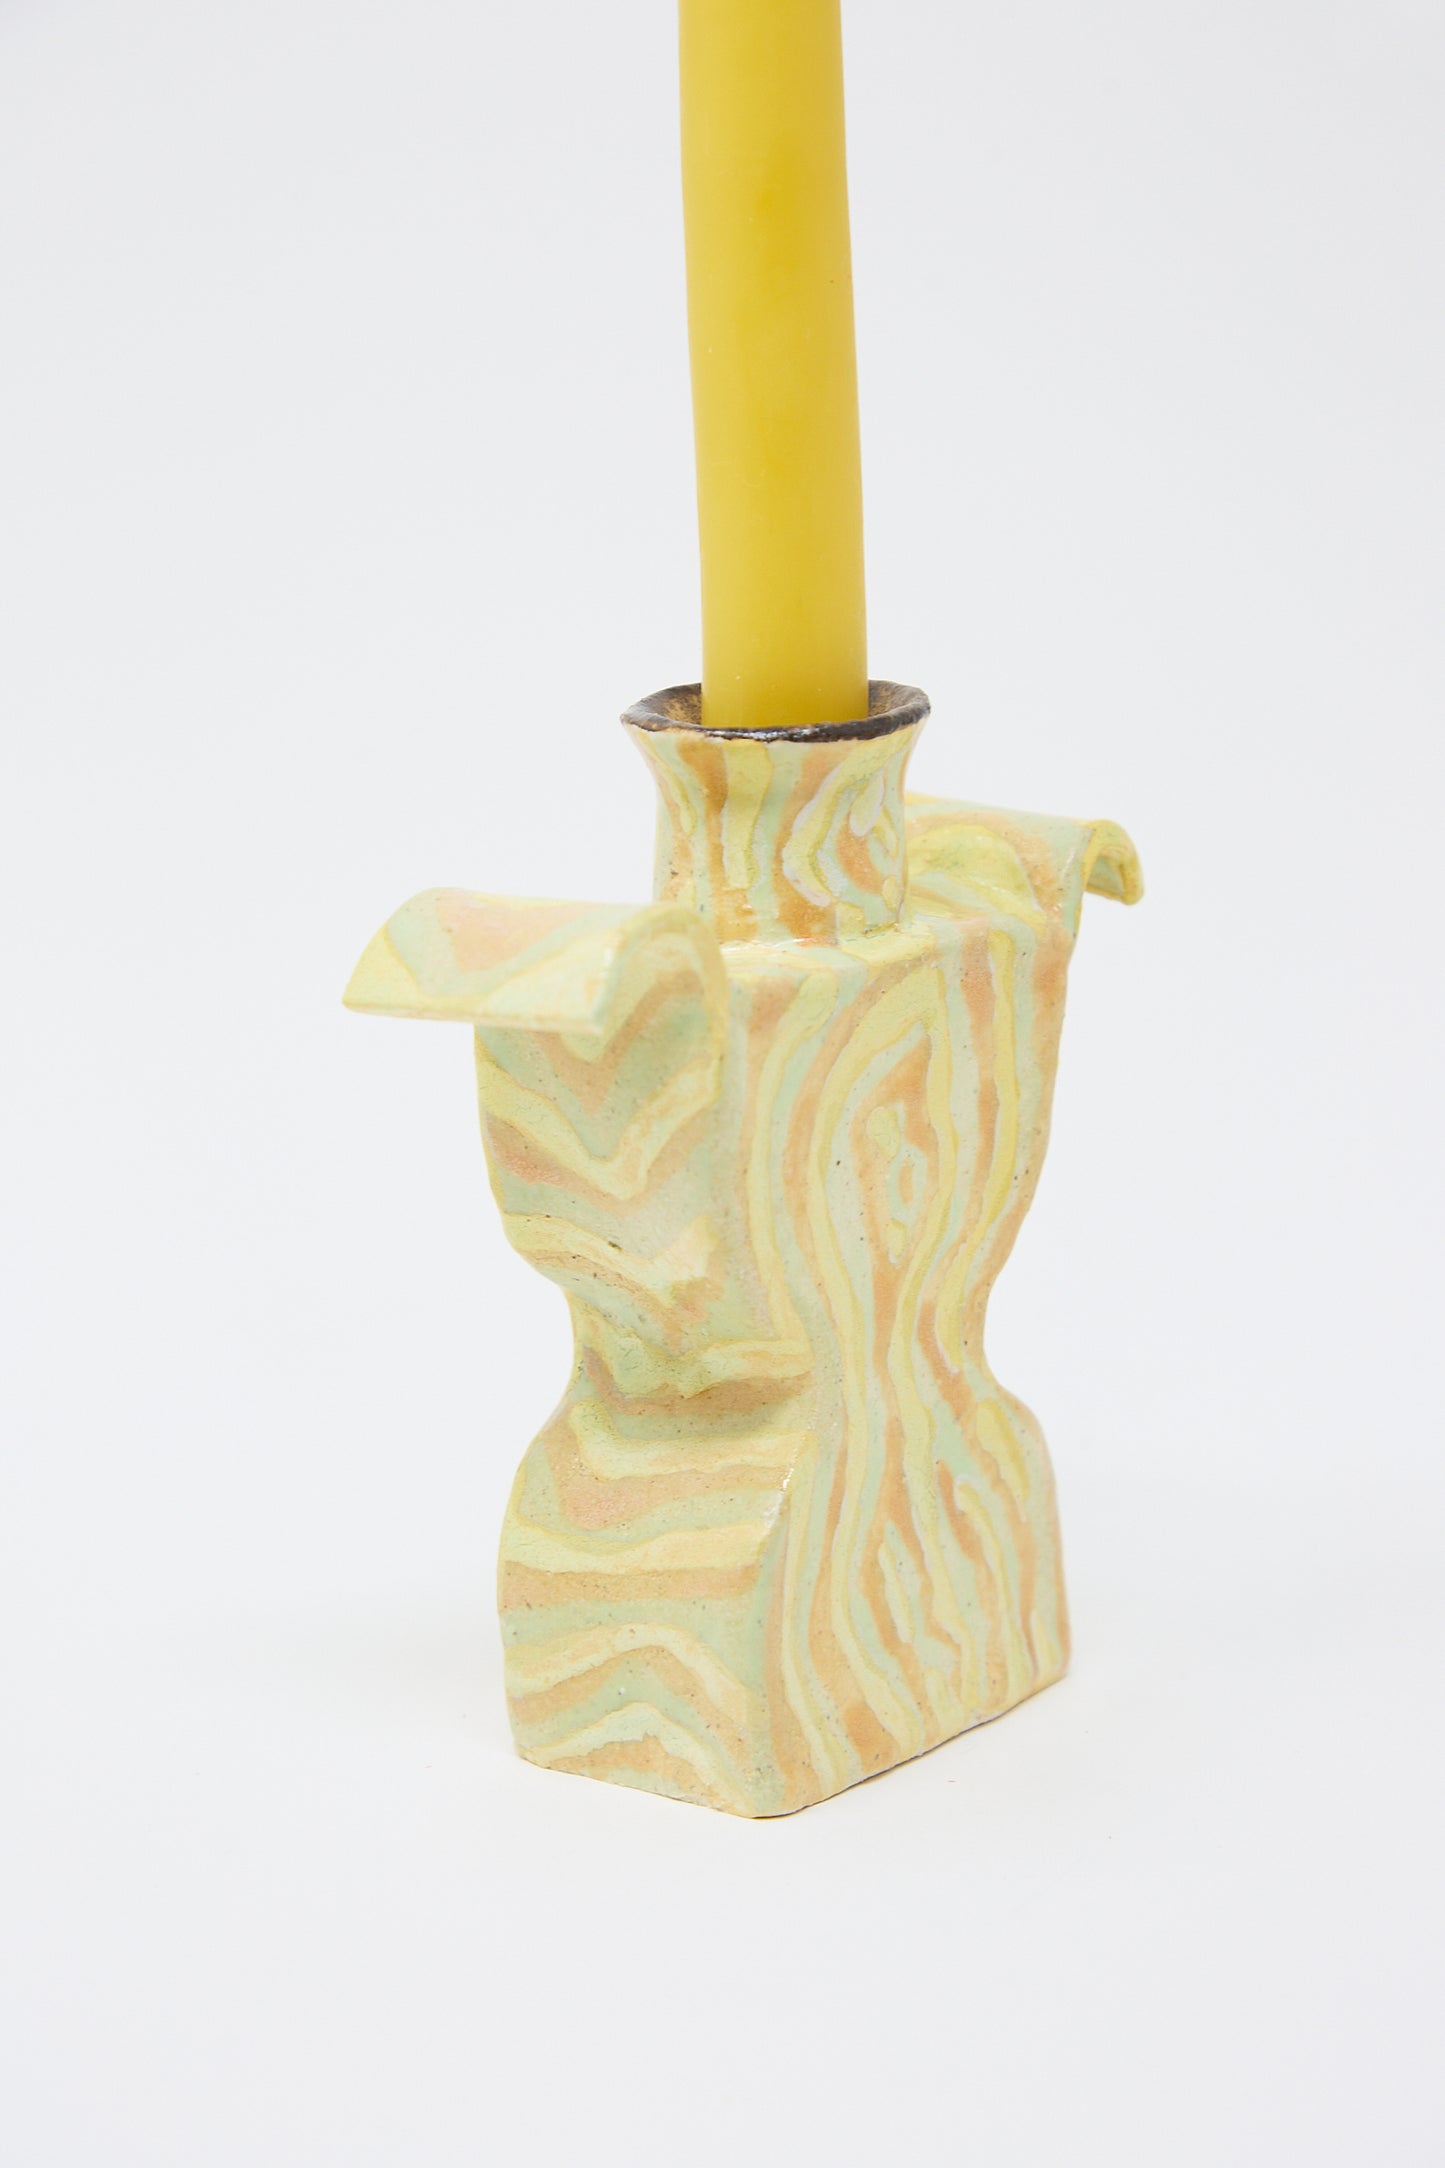 A Pearce Williams Woodgrain Candlesticks Pair positioned in a marbled, multicolored handcrafted ceramic candle holder with an abstract design on a white background.